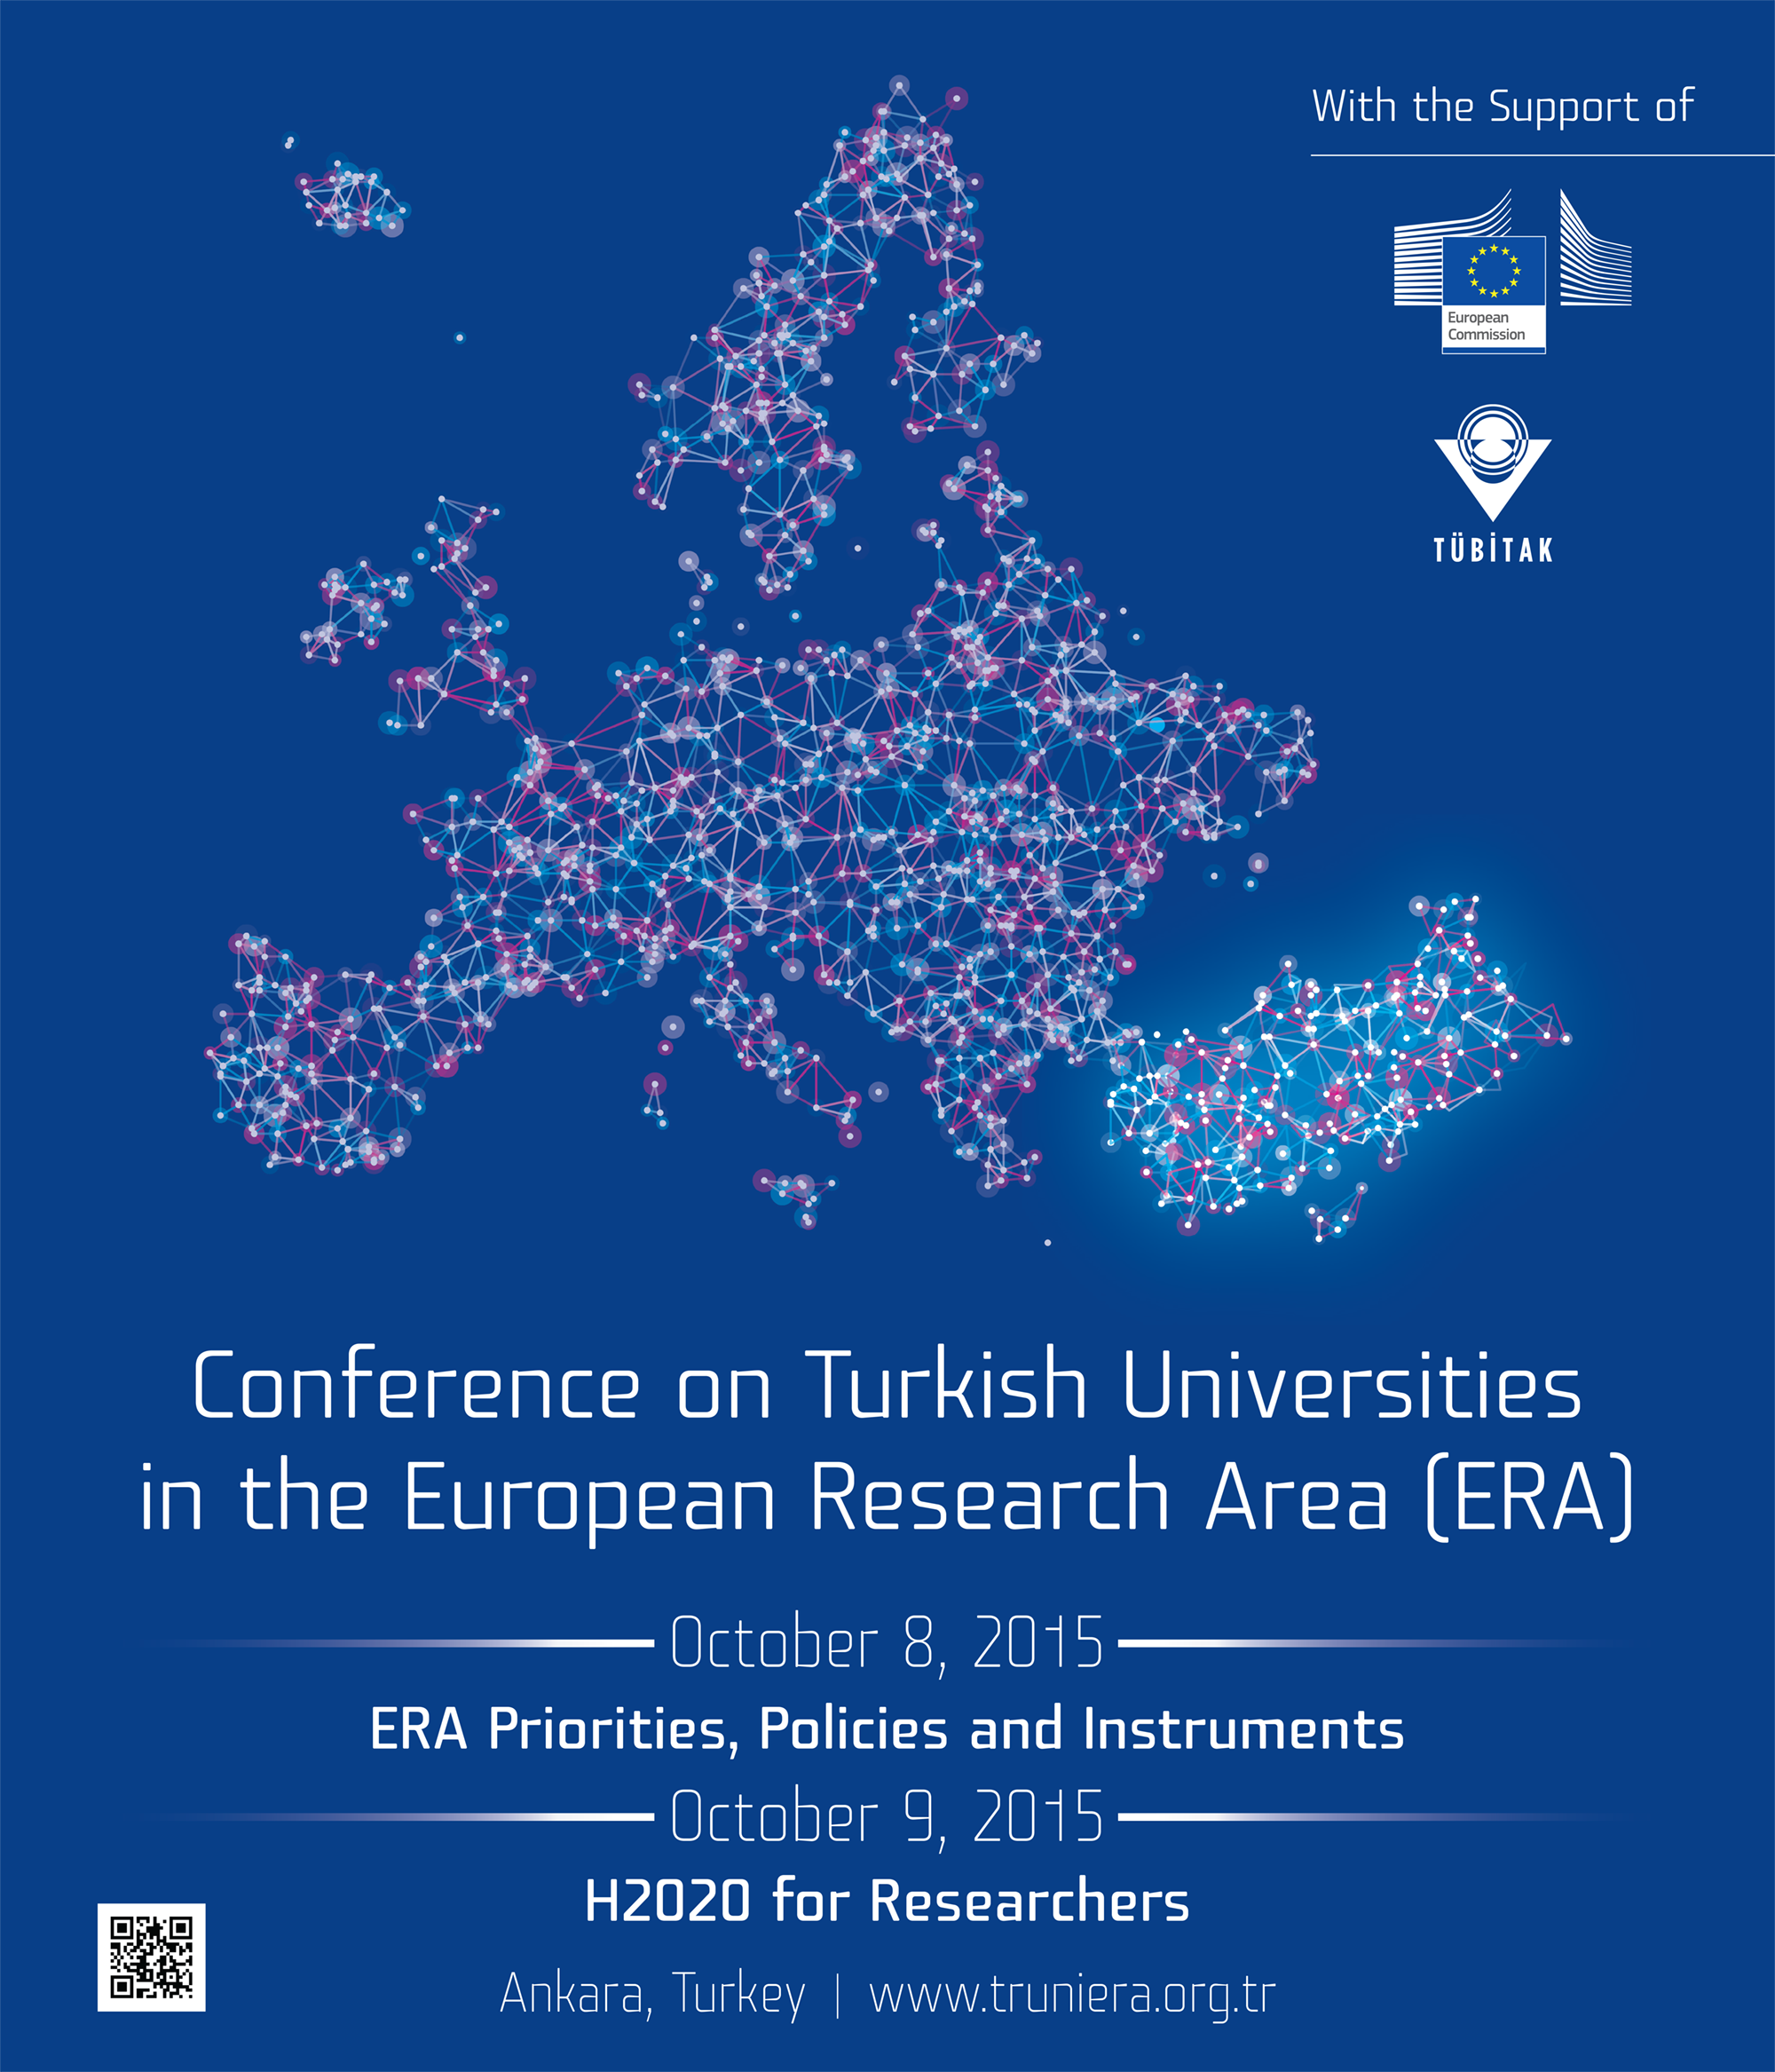 Conference: “Turkish Universities in the European Research Area” Ankara Hilton Hotel, October 8-9